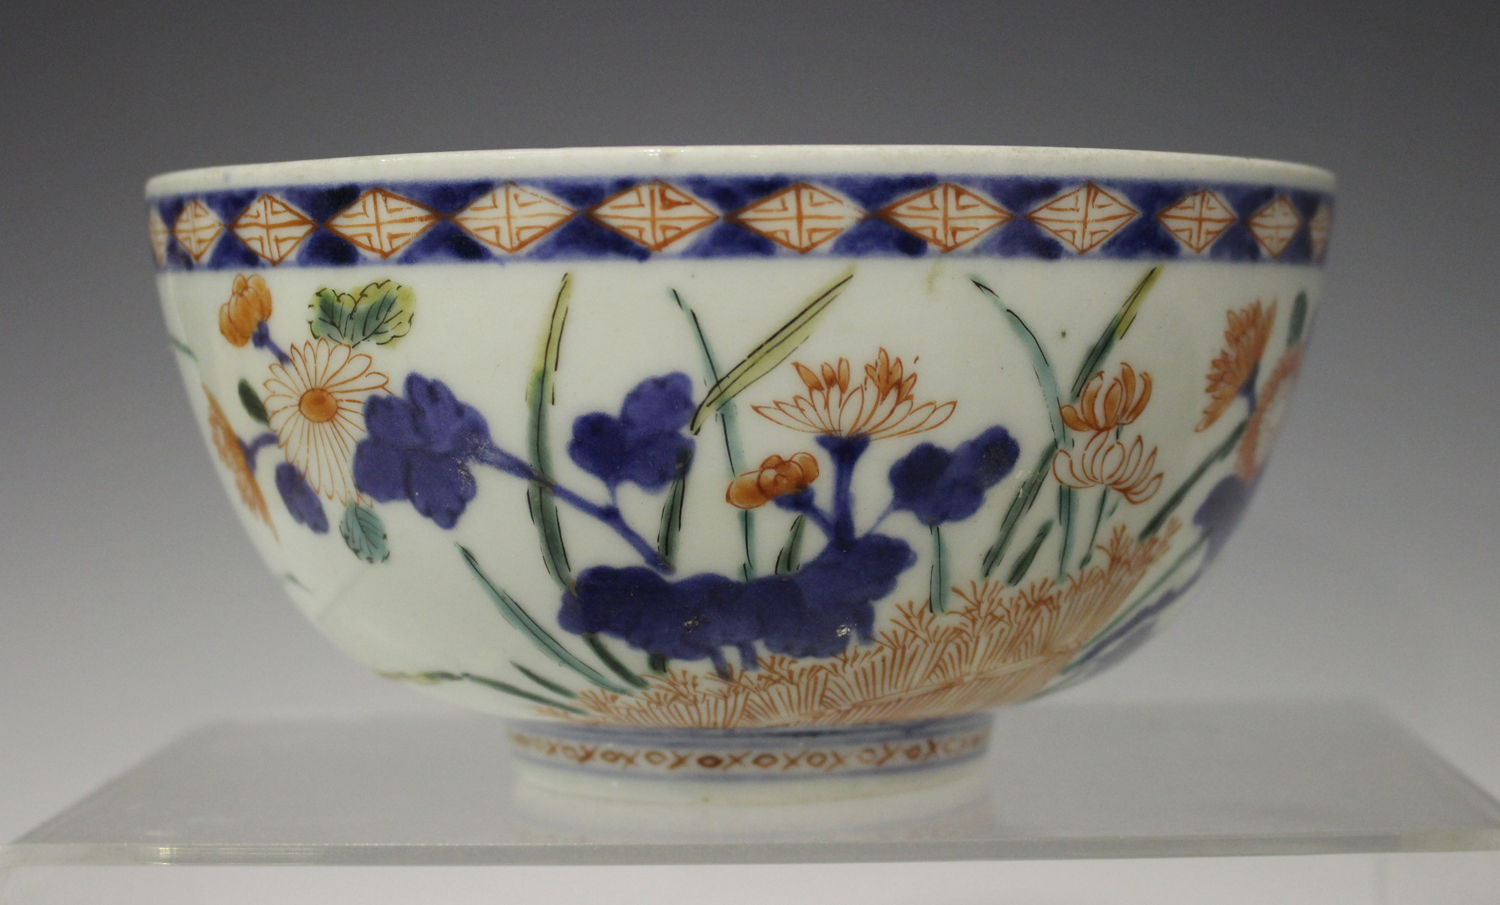 A Japanese Imari porcelain bowl, early 18th century, painted with peonies, chrysanthemums and lotus, - Image 6 of 6